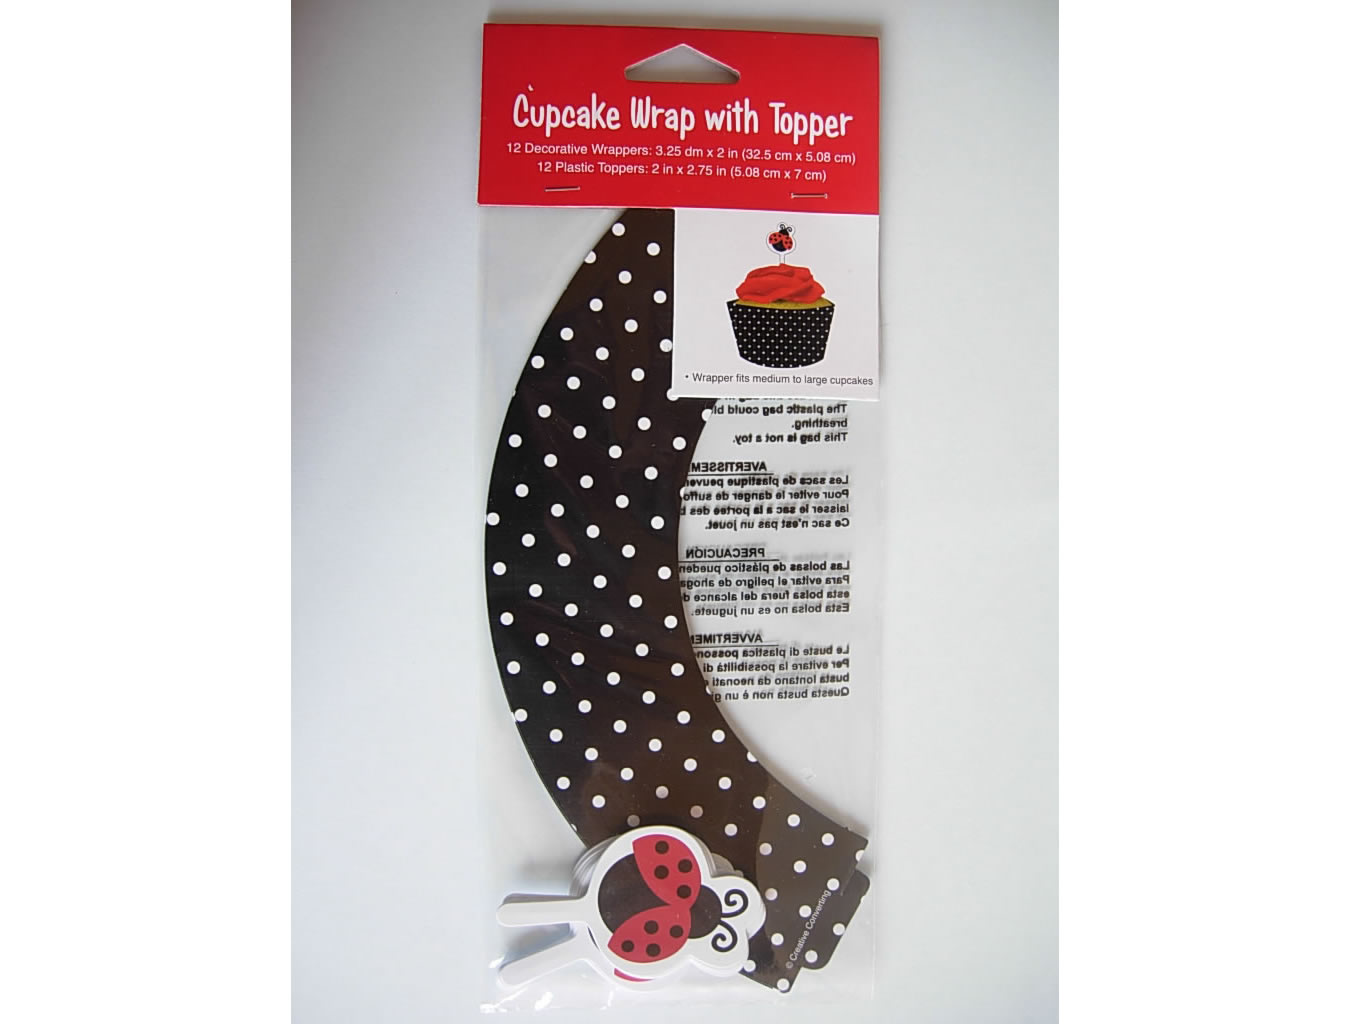 outlet cucina - CUPCAKE WRAP WITH TOPPER - labottegadelleideelecco.it